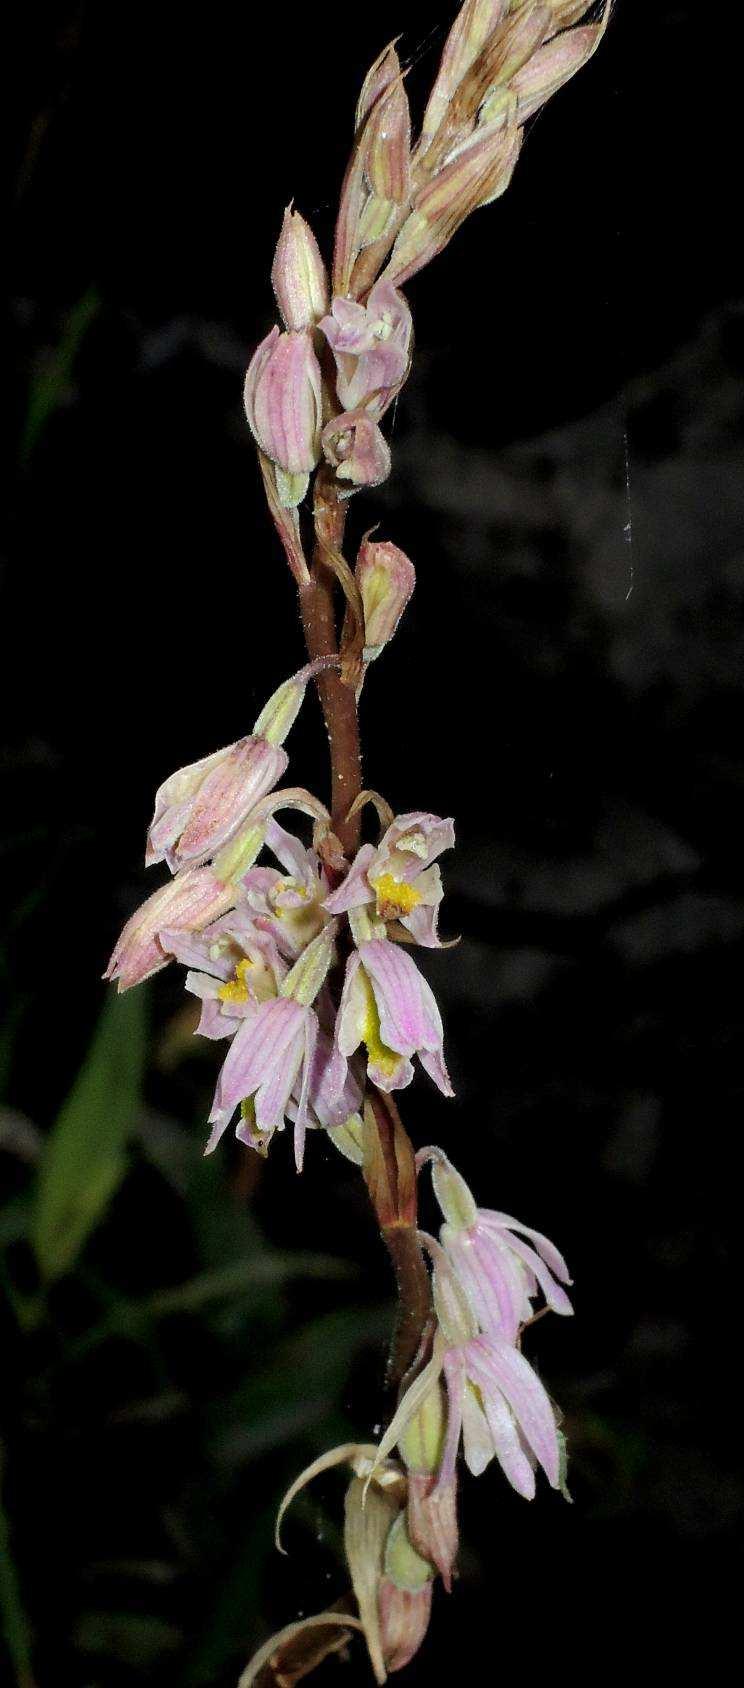 Epidendroideae recorded for the first time in the south Epidendroideae (Pachystoma pubescens) (Hậu khẩu lông) was known as an orchid species distributed in the south of Vietnam.